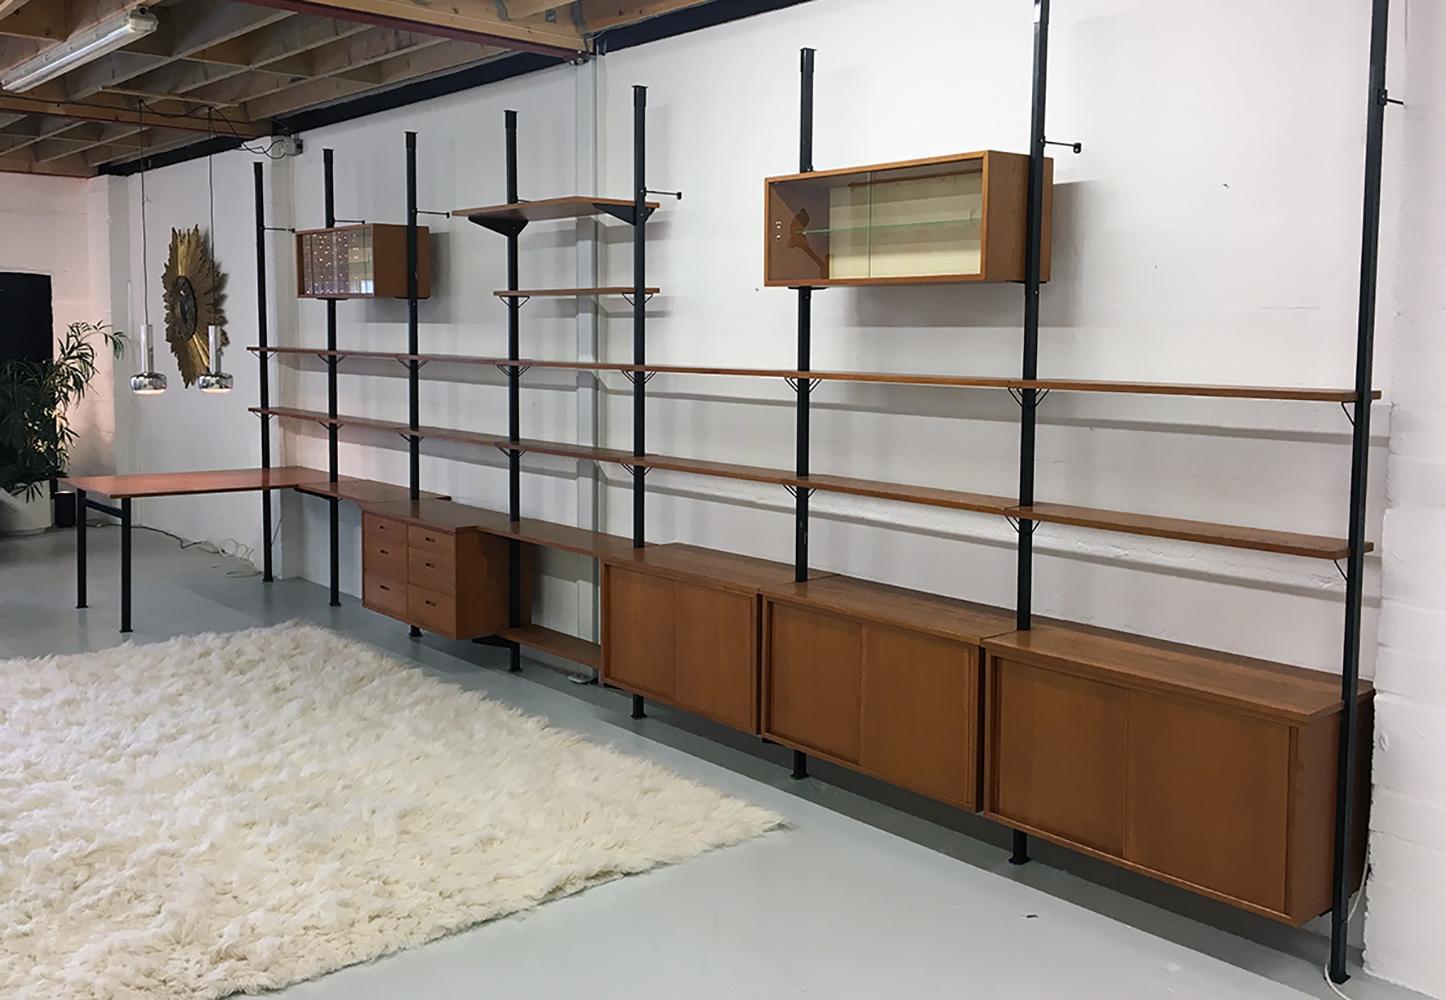 A large run of 1960s modular shelving system ‘Pira’ designed by Olaf Pira for string of Sweden, made of teak and steel.
Designed as a ‘tension’ system where each upright is trapped between the floor and ceiling eliminating the need for wall